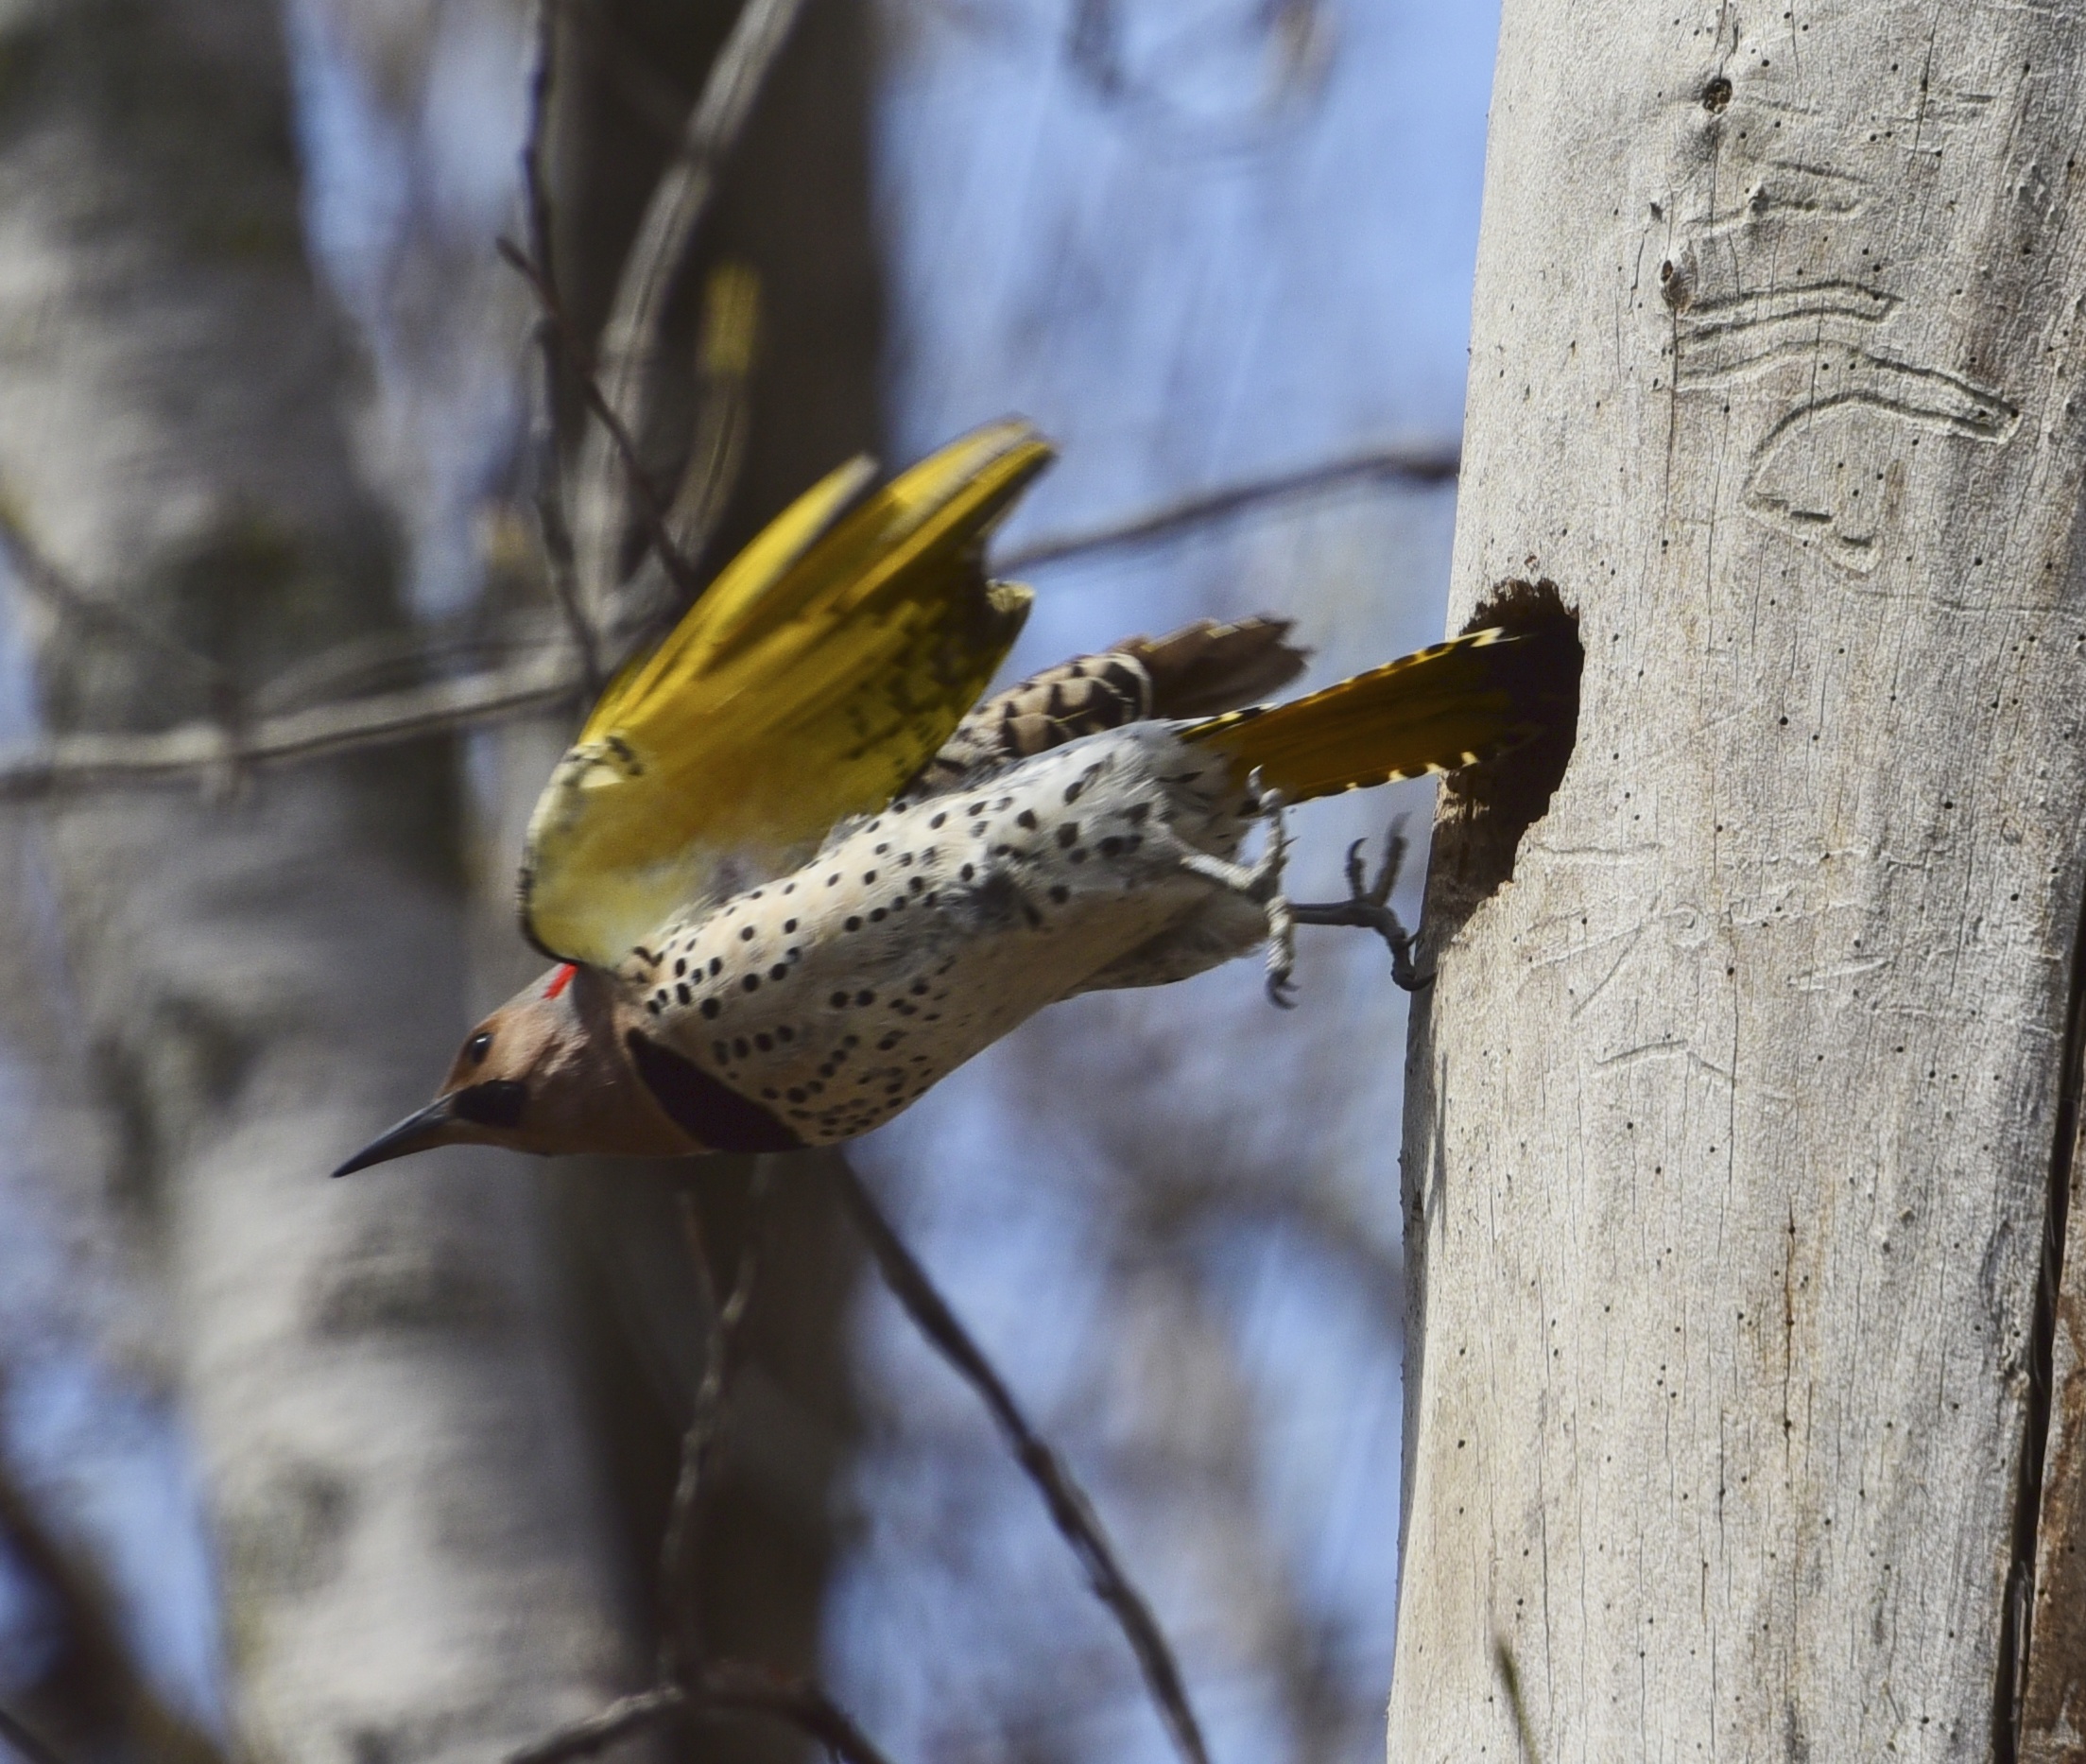 Action photo of a Northern Flicker boosting itself out of a hole in a dead tree. Bright yellow flashes from the underside of its unfurling wing, as it shows its white breast with black dots.